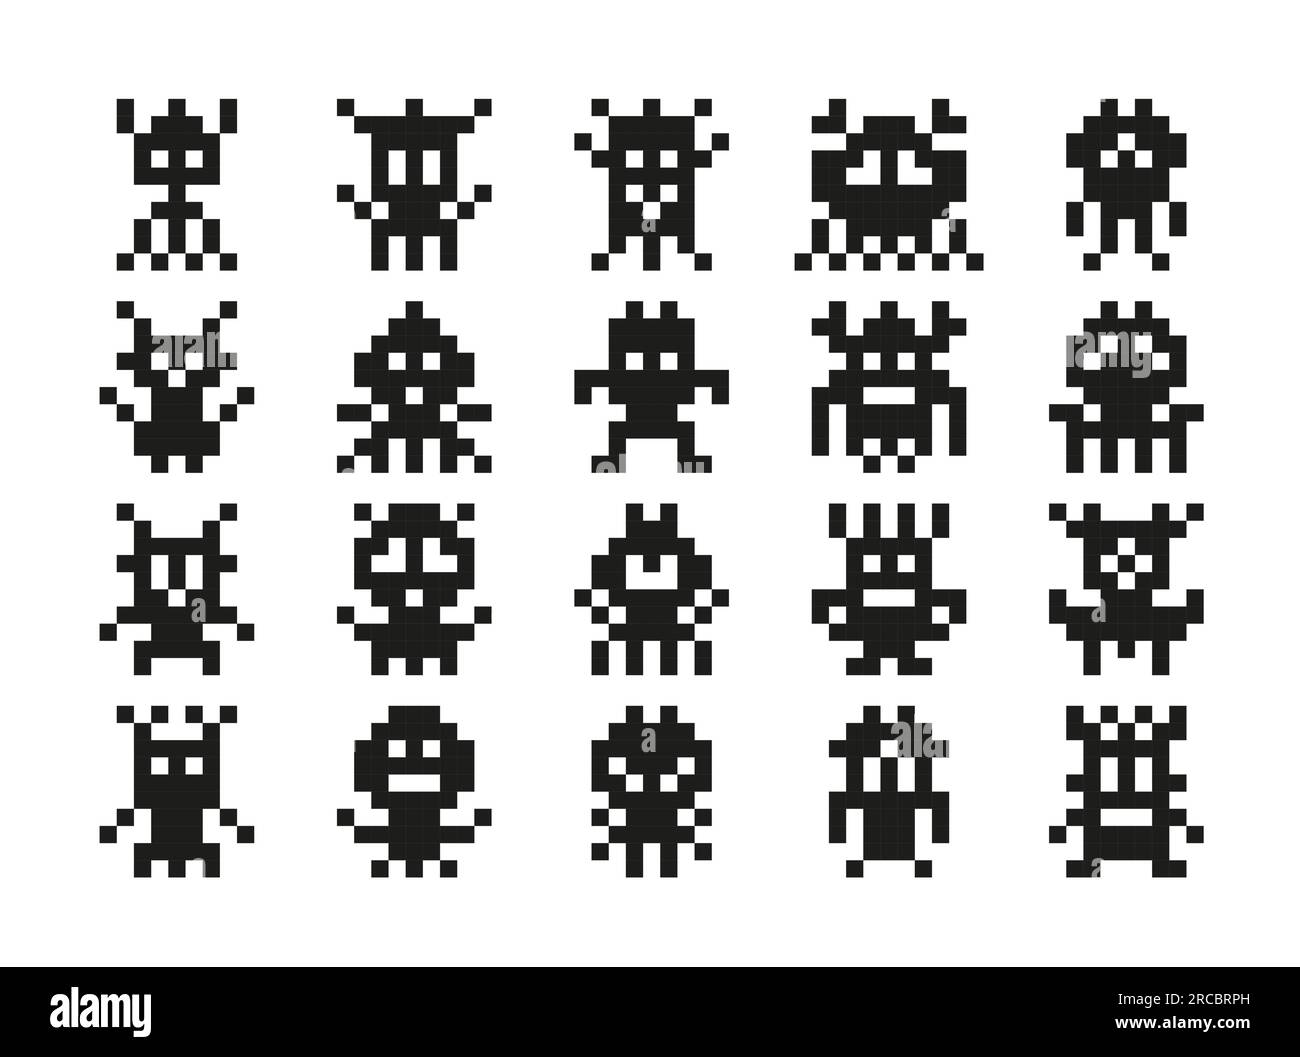 Pixel monsters, arcade games characters of vector alien creatures, space invaders, robots, viruses or trolls. 8 bit pixel art personages of retro computer and video games with funny faces, tentacles Stock Vector